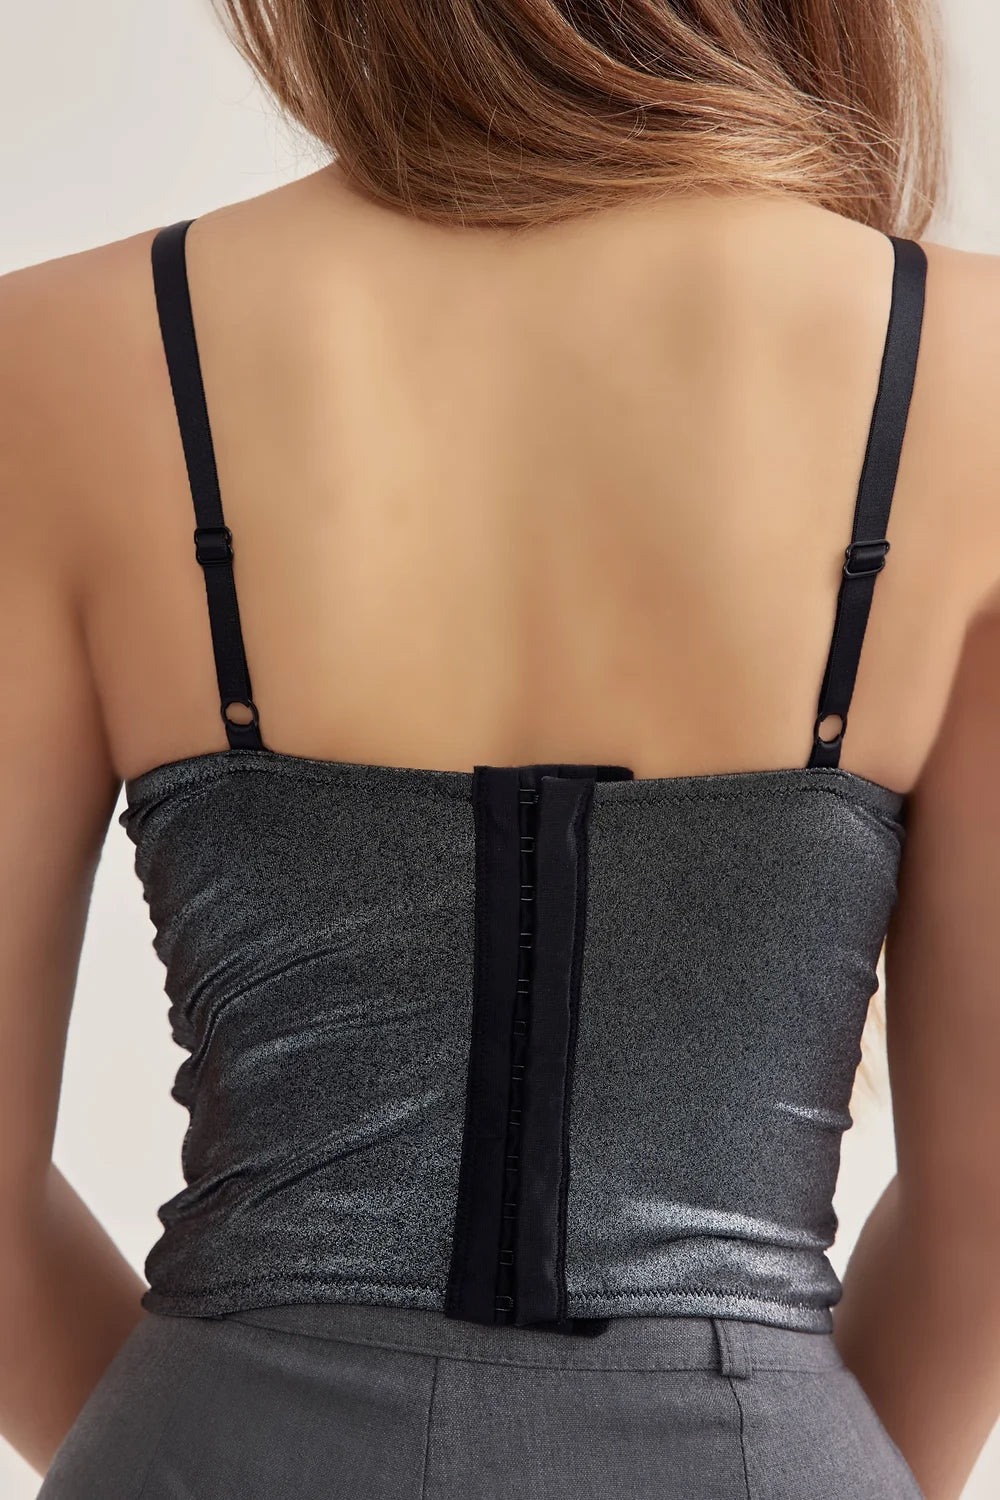 Silver Satin Leather Look Corset Top